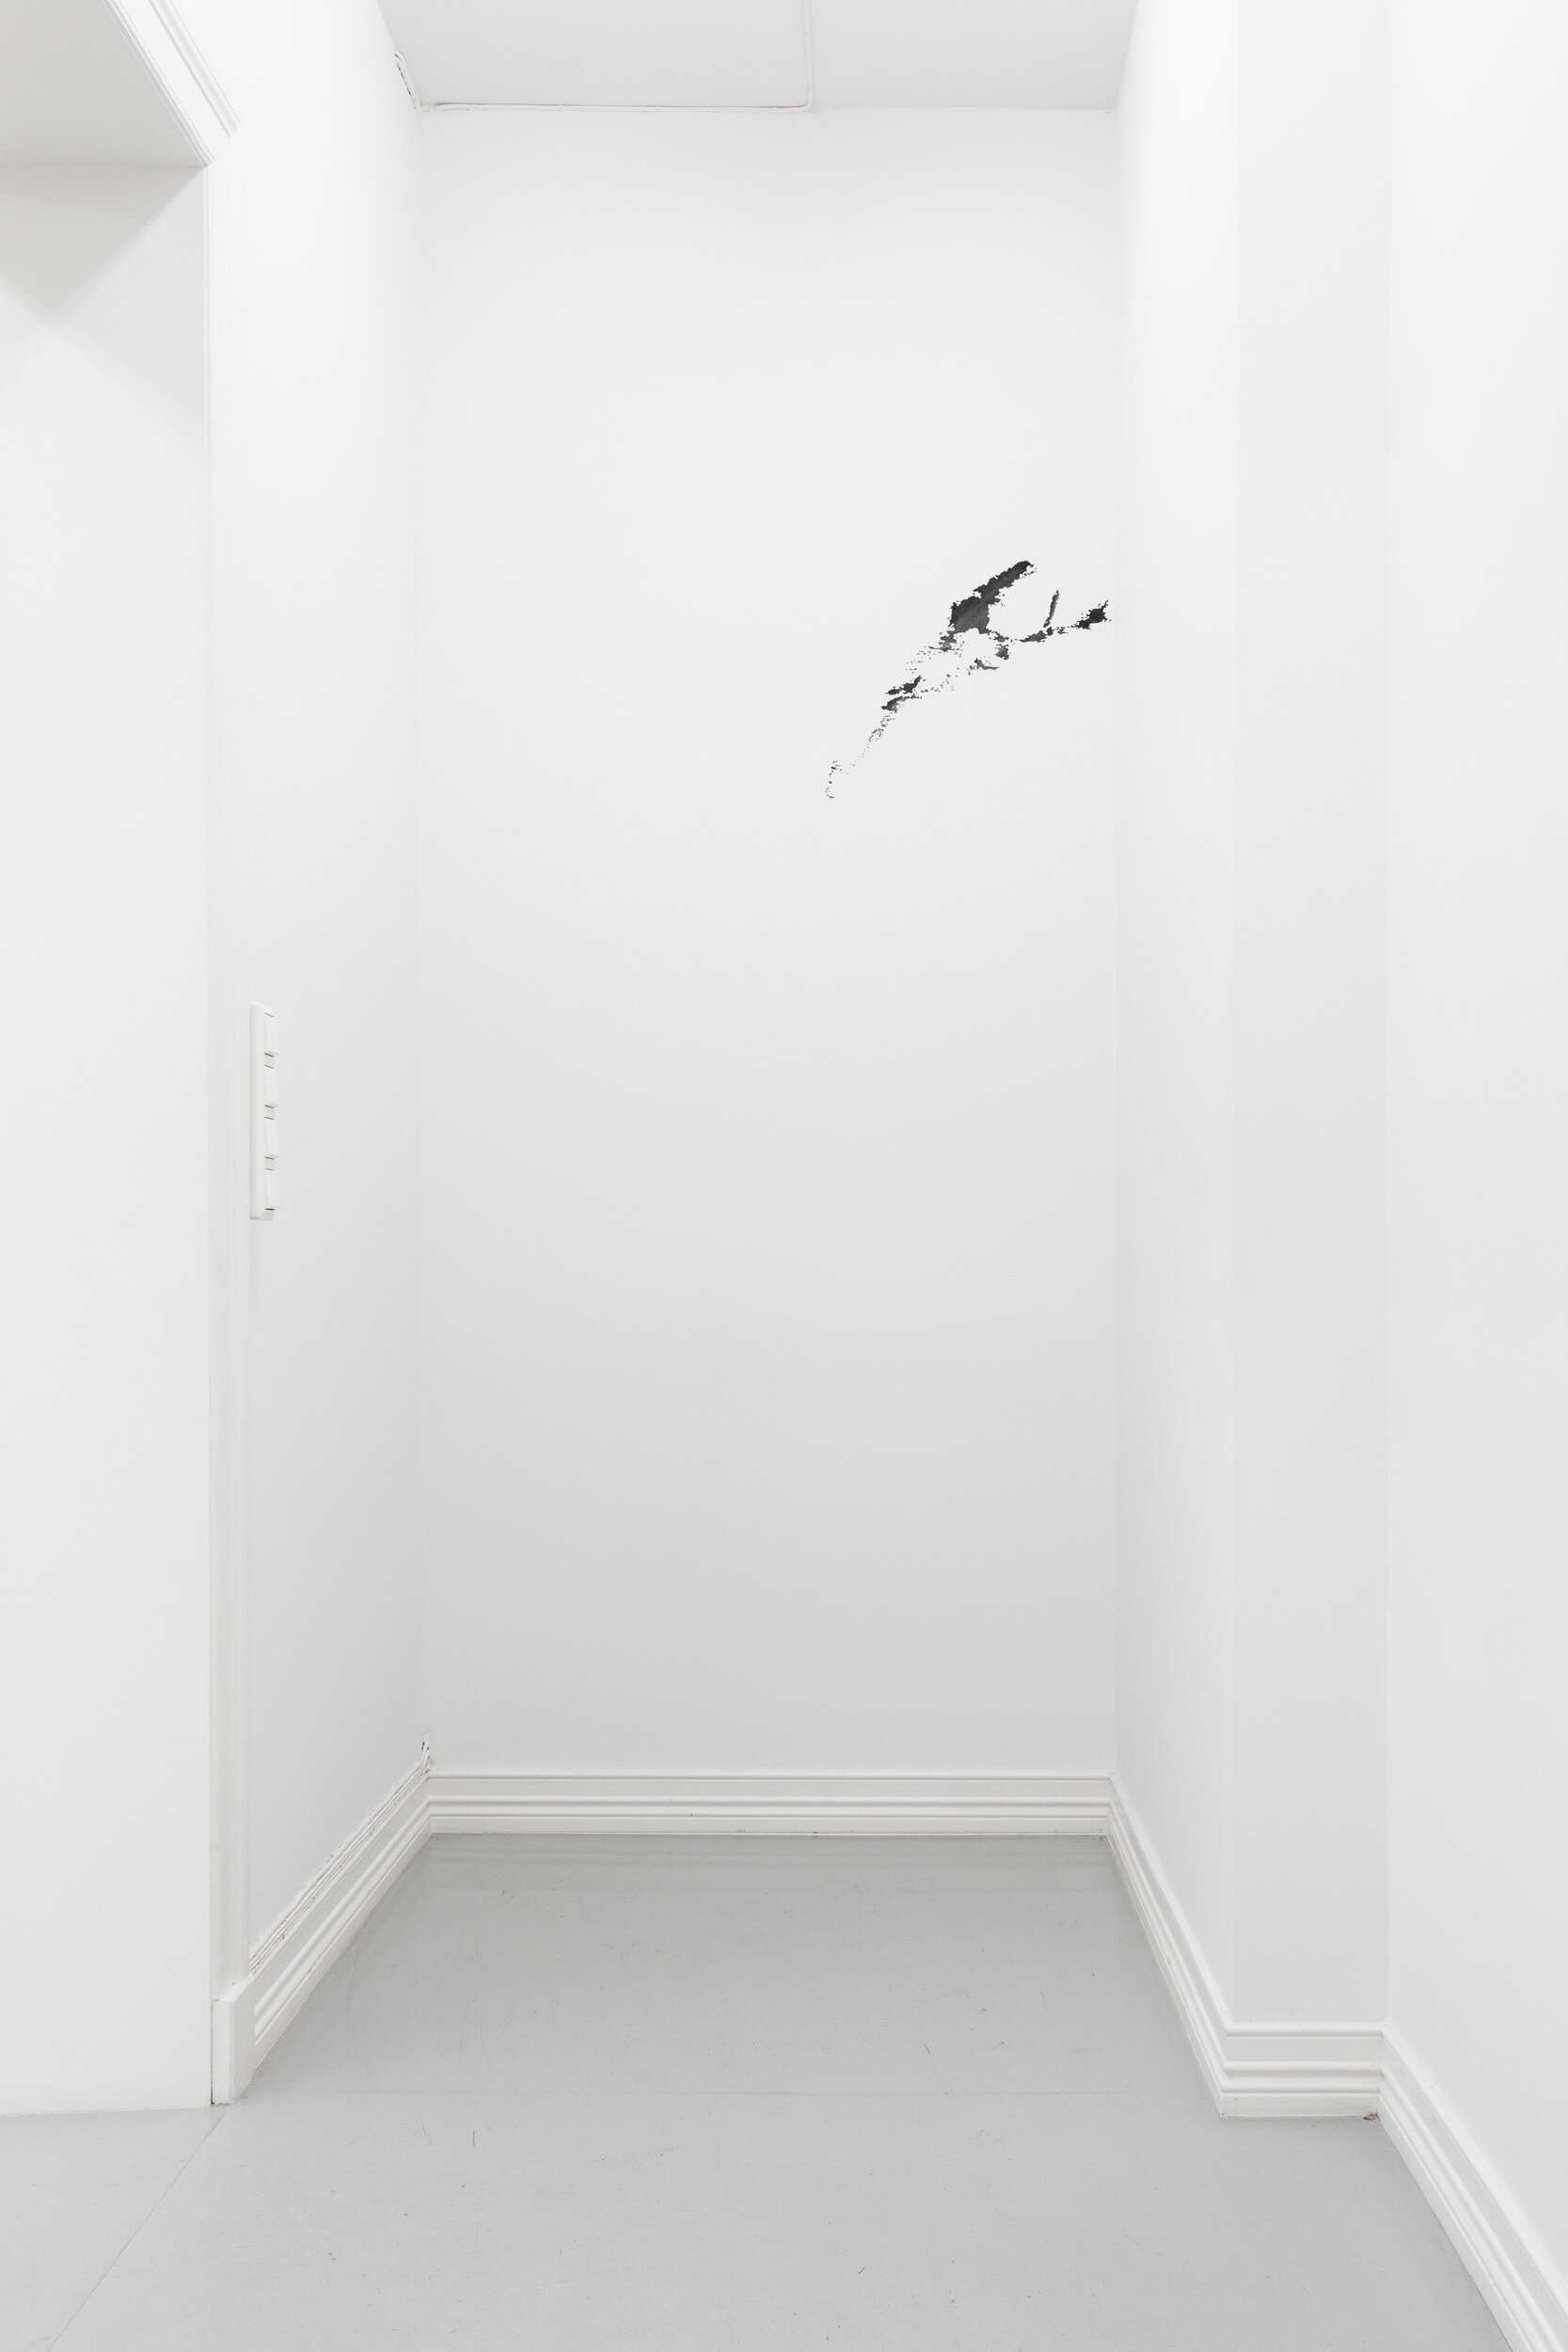  Wall Drawing for Galleri Riis I, 2019. Crayon on wall, H 324 x W 135 cm. Unique. Installation view Jan Groth ‘Signs and Figures’, Galleri Riis, Oslo 2019. Photo: Adrian Bugge 